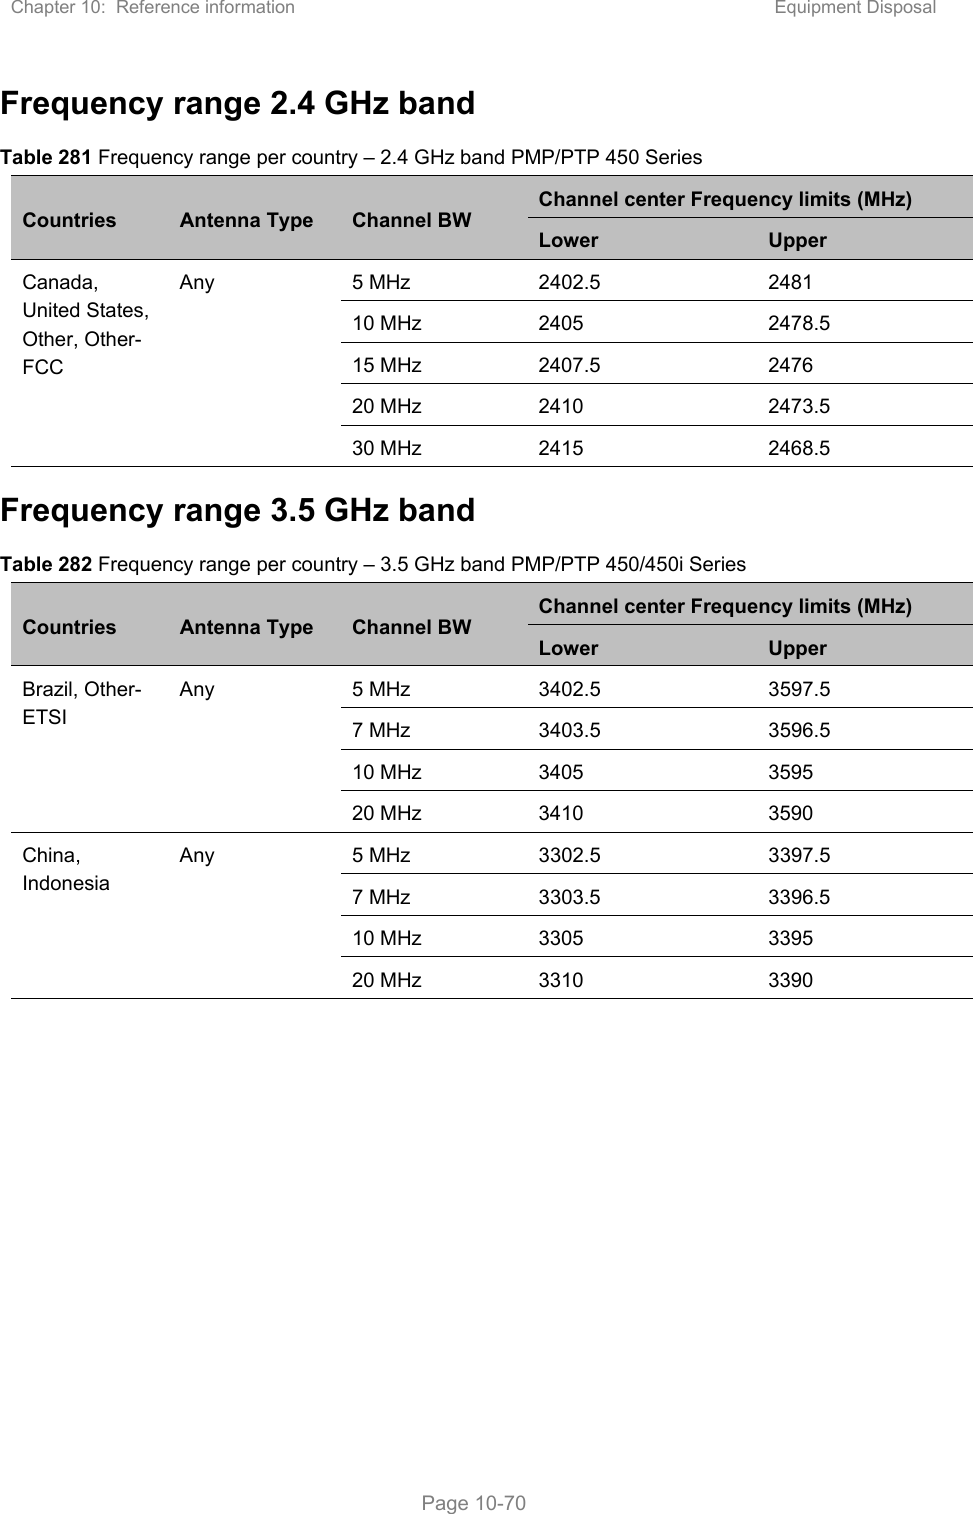 Chapter 10:  Reference information  Equipment Disposal   Page 10-70 Frequency range 2.4 GHz band Table 281 Frequency range per country – 2.4 GHz band PMP/PTP 450 Series  Countries  Antenna Type  Channel BW Channel center Frequency limits (MHz) Lower  Upper Canada, United States, Other, Other-FCC Any  5 MHz  2402.5  2481 10 MHz  2405  2478.5 15 MHz  2407.5  2476 20 MHz  2410  2473.5 30 MHz  2415  2468.5 Frequency range 3.5 GHz band Table 282 Frequency range per country – 3.5 GHz band PMP/PTP 450/450i Series  Countries  Antenna Type  Channel BW Channel center Frequency limits (MHz) Lower  Upper Brazil, Other-ETSI Any  5 MHz  3402.5  3597.5 7 MHz  3403.5  3596.5 10 MHz  3405  3595 20 MHz  3410  3590 China, Indonesia  Any  5 MHz  3302.5  3397.5 7 MHz  3303.5  3396.5 10 MHz  3305  3395 20 MHz  3310  3390   